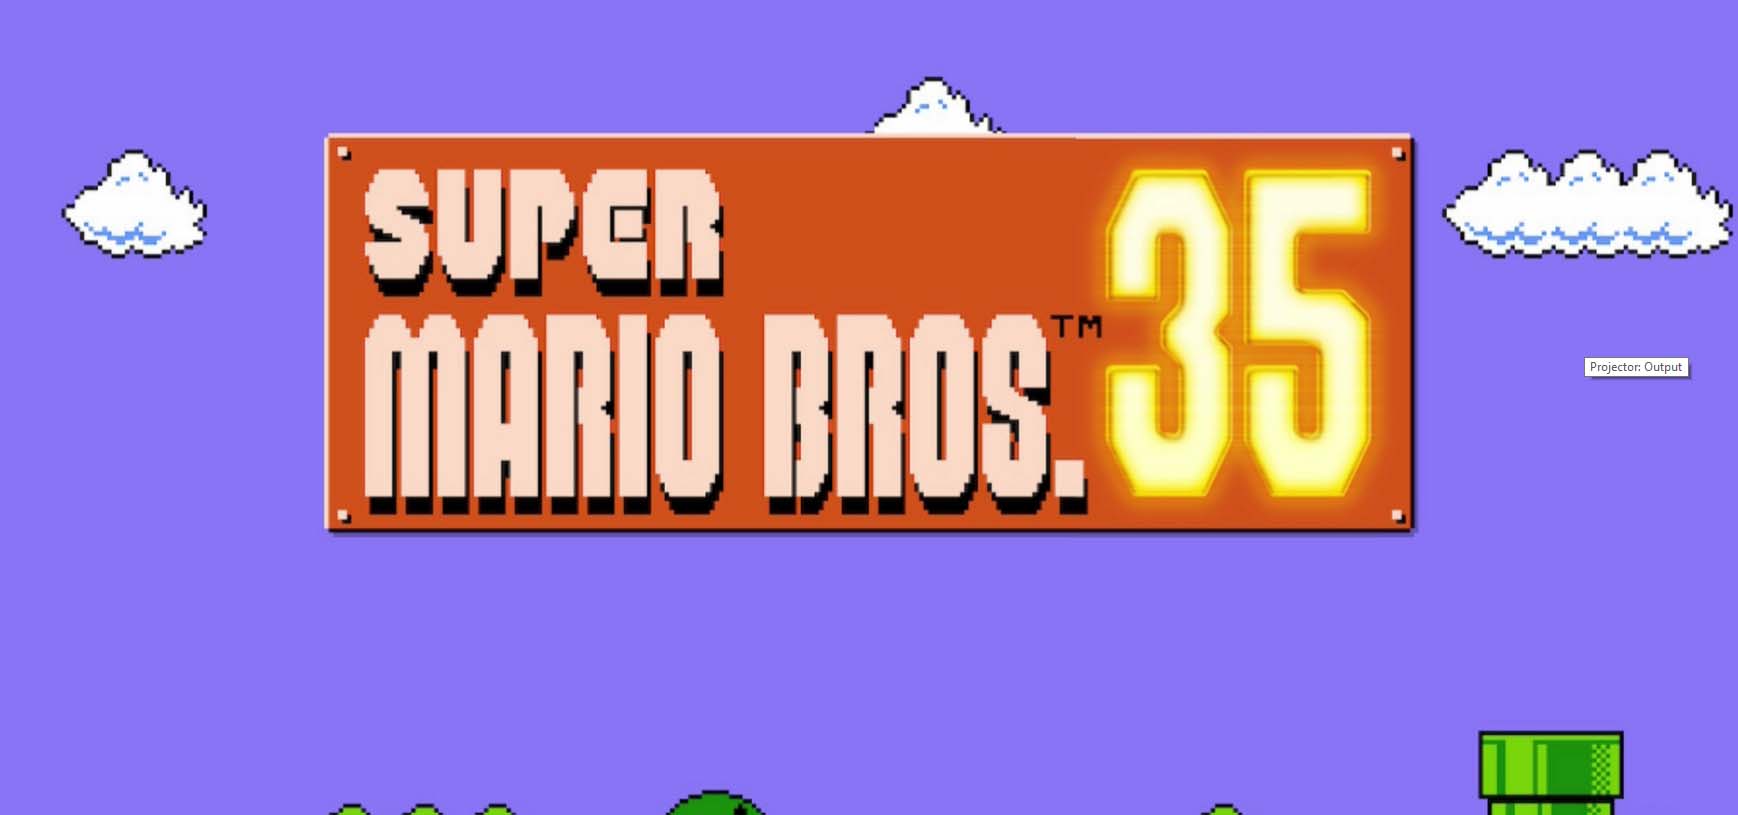 Connection to games clear in Mario Bros. big-screen debut - KP TIMES